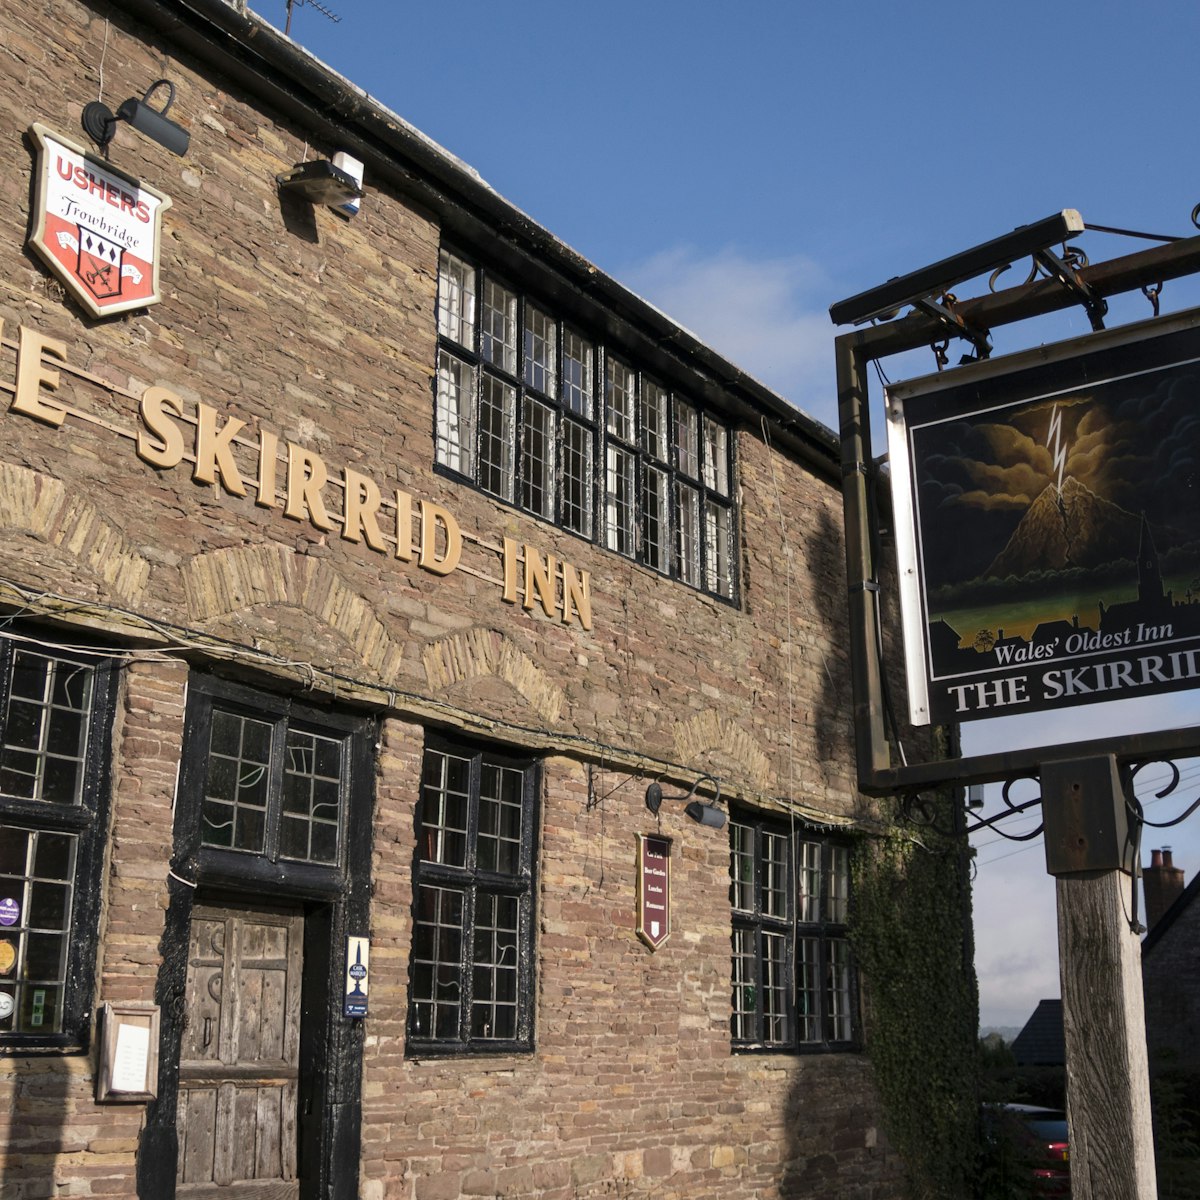 The Skirrid Pub , dating from about 1100, Llanvihangel Crucorney, Abergavenny reputed to be the oldest pub in Wales,UK. taken 15/12/2014; Shutterstock ID 267374384; Your name (First / Last): Josh/Vogel; GL account no.: 56530; Netsuite department name: Online-Design; Full Product or Project name including edition: 65050/​Online Design​/JoshVogel/IYLs